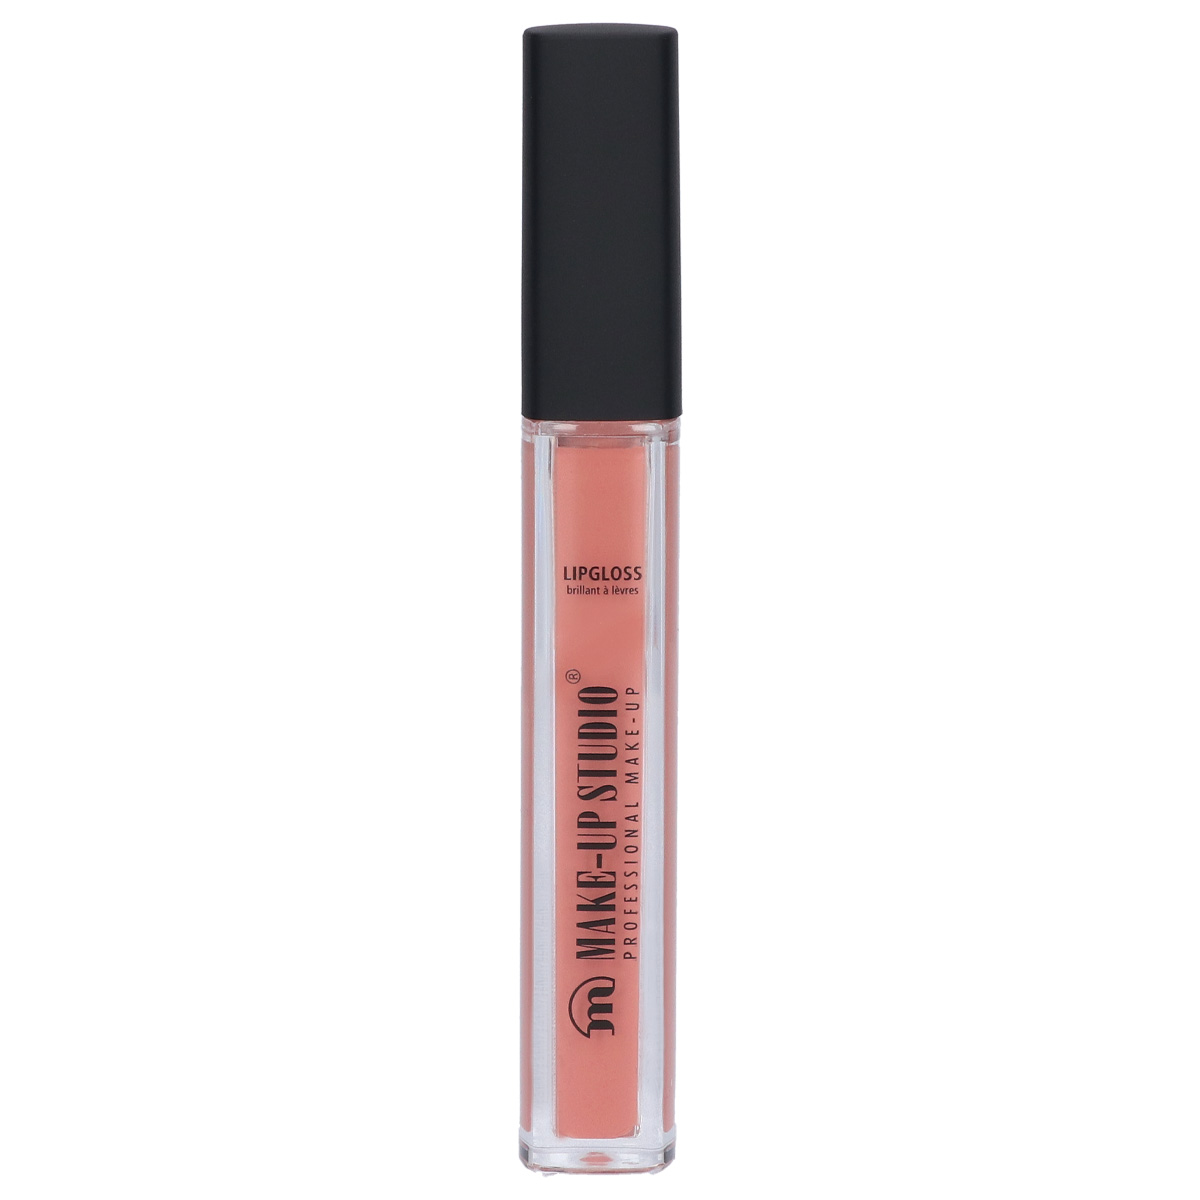 Make-up Studio Lip Gloss Paint - Sophisticated nude